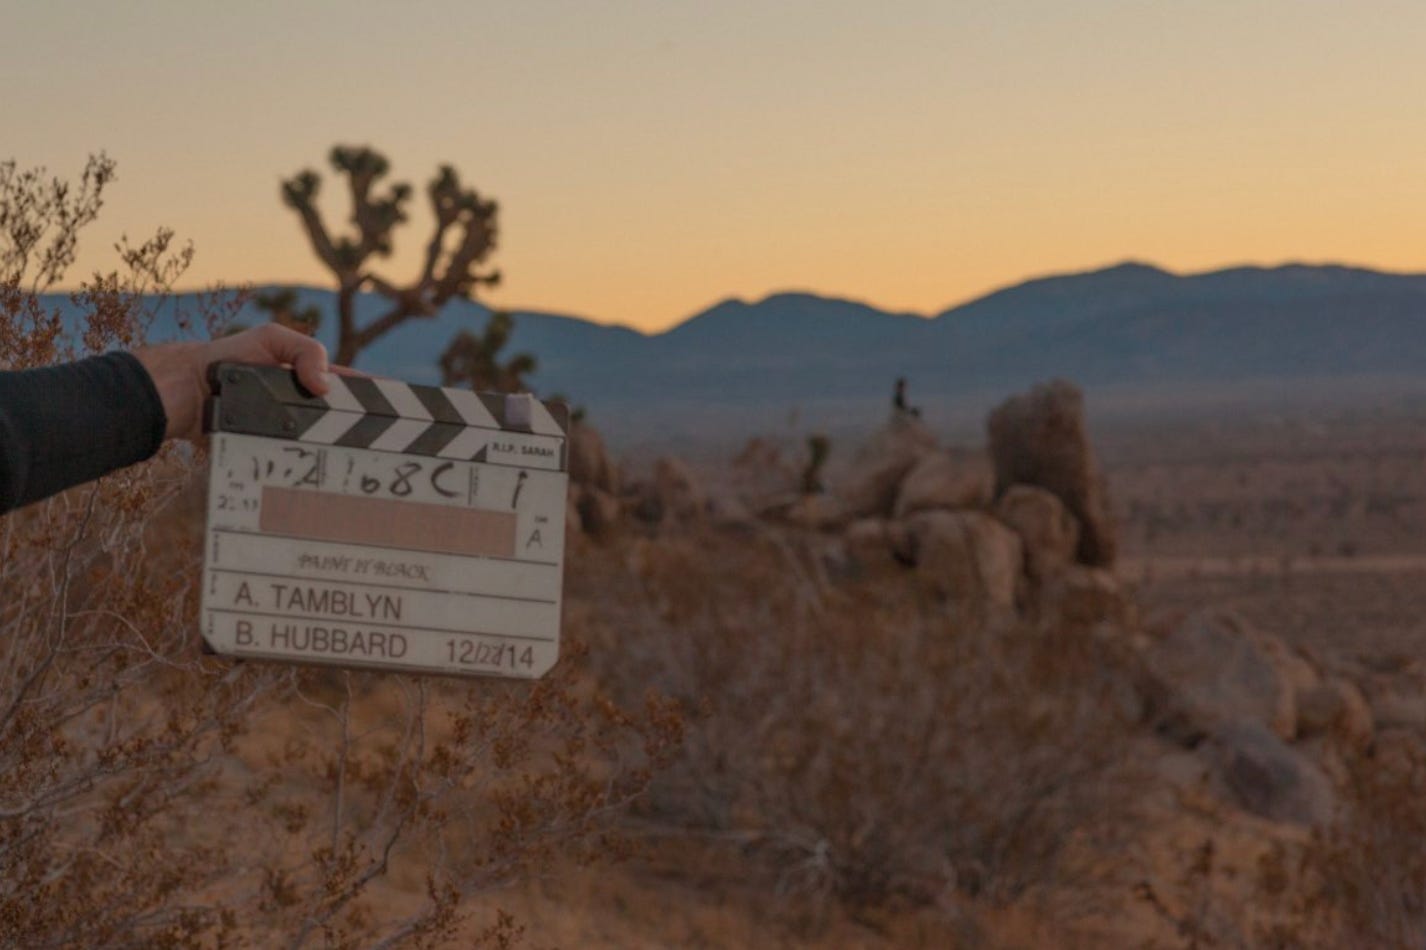 A hand holding a clapboard in the desert. The person's body is out of frame. The clapboard reads: Paint It Black A.Tamblyn / B. Hubbard / 12.22.14